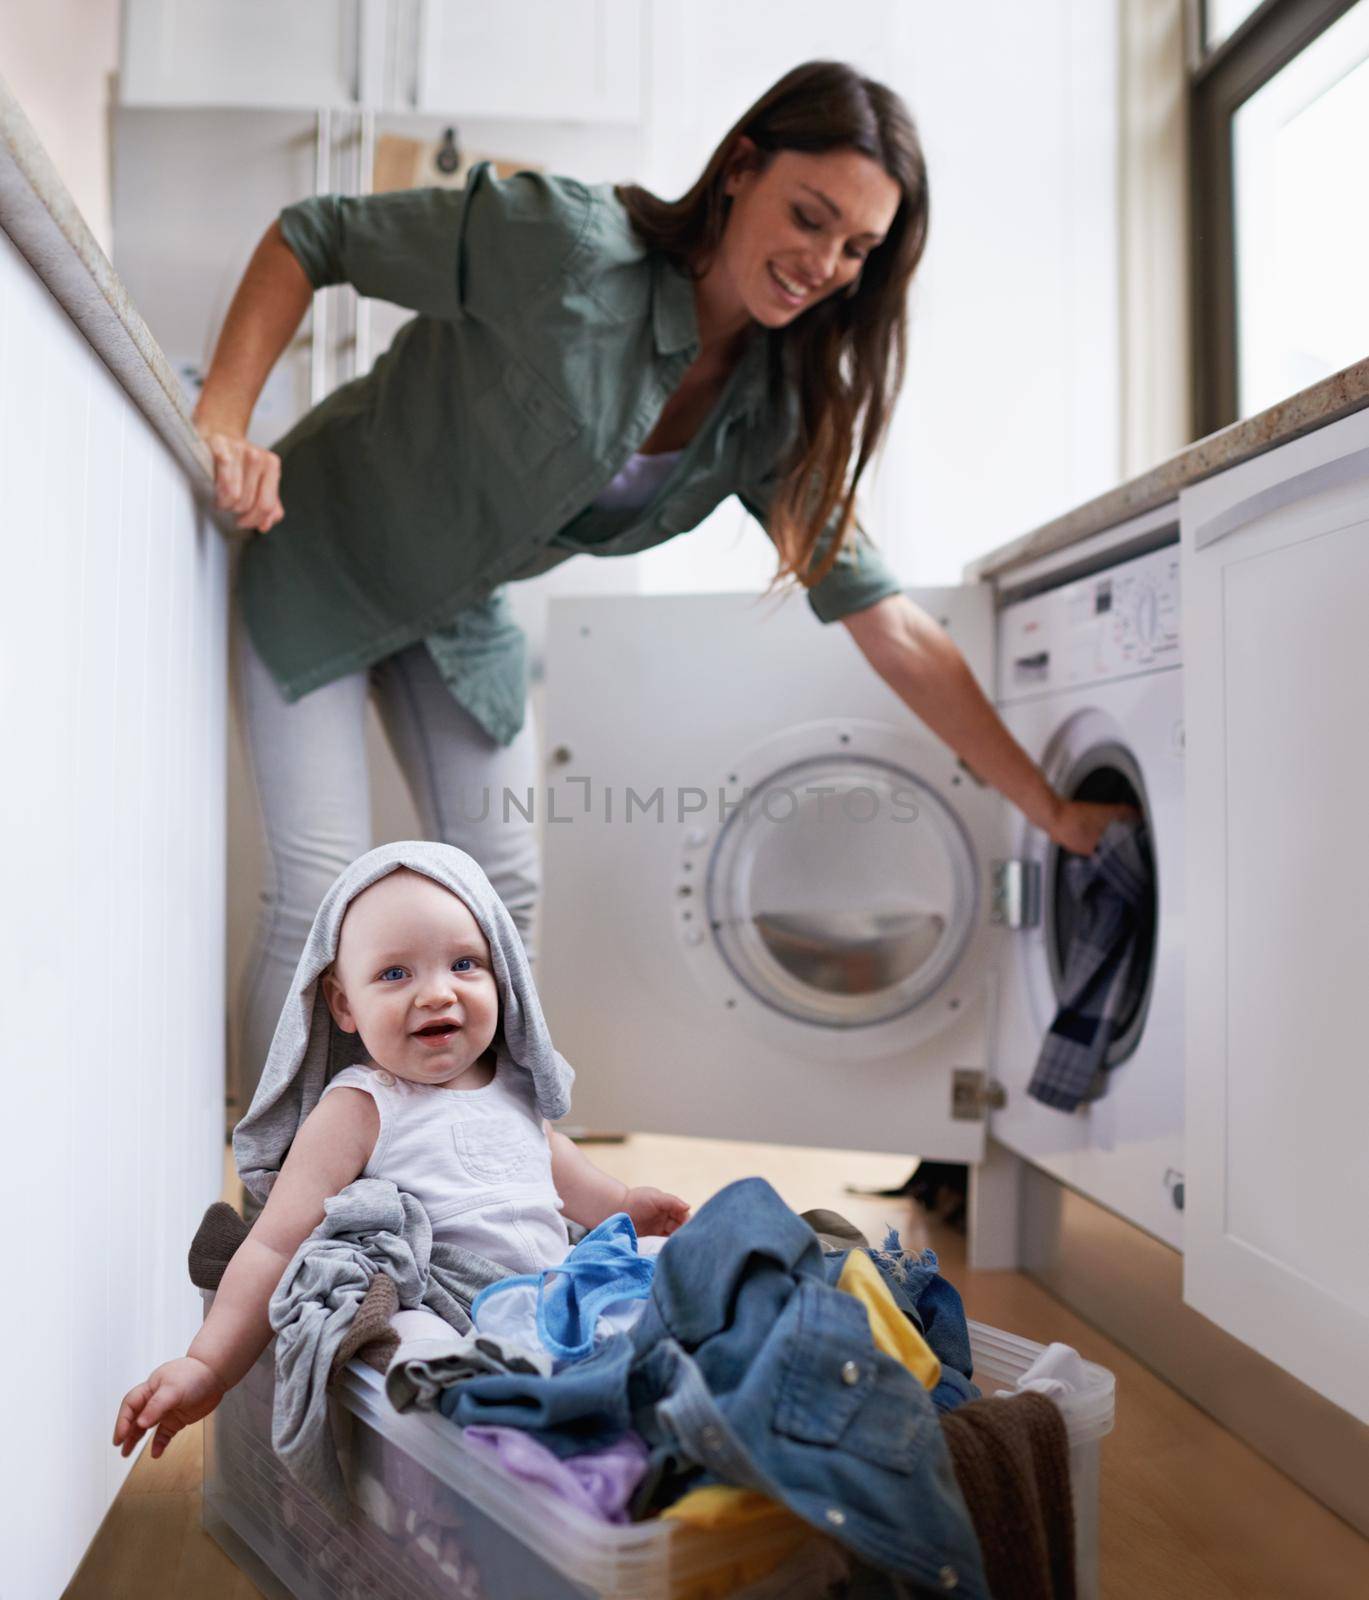 A mother doing laundry while keeping an eye on her baby.